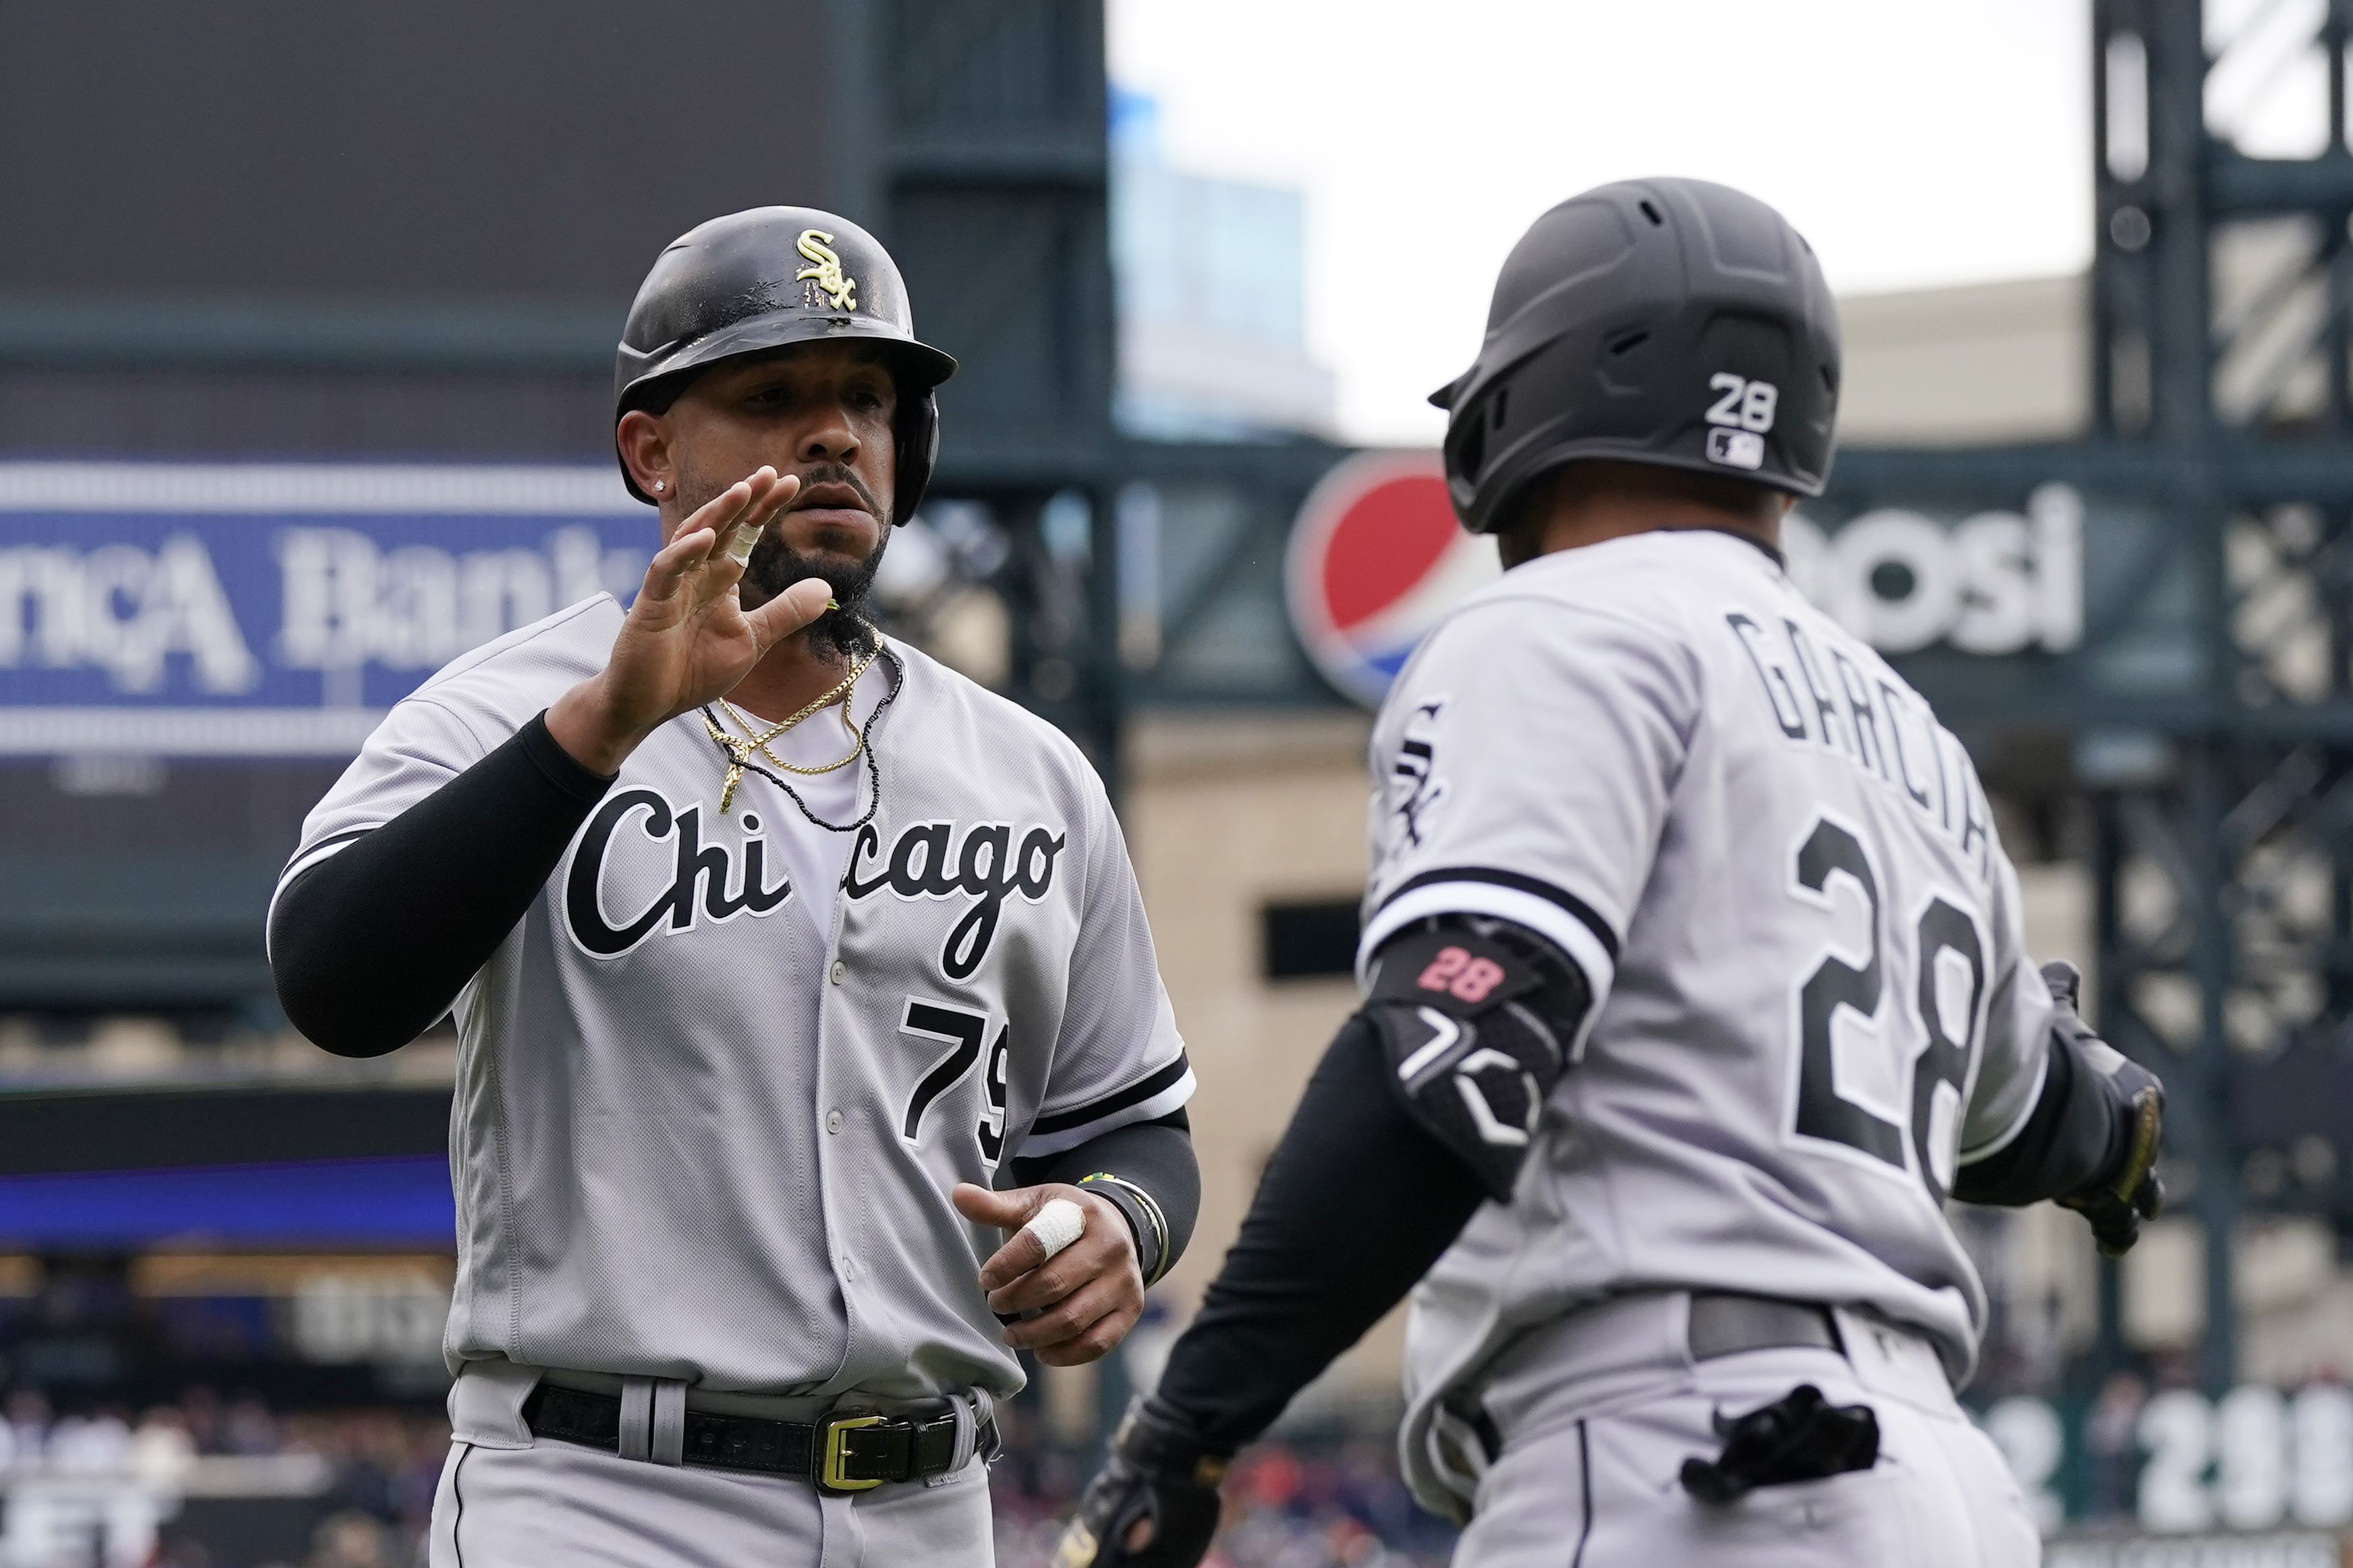 Tigers beat White Sox 4-3 in debut of new uniform